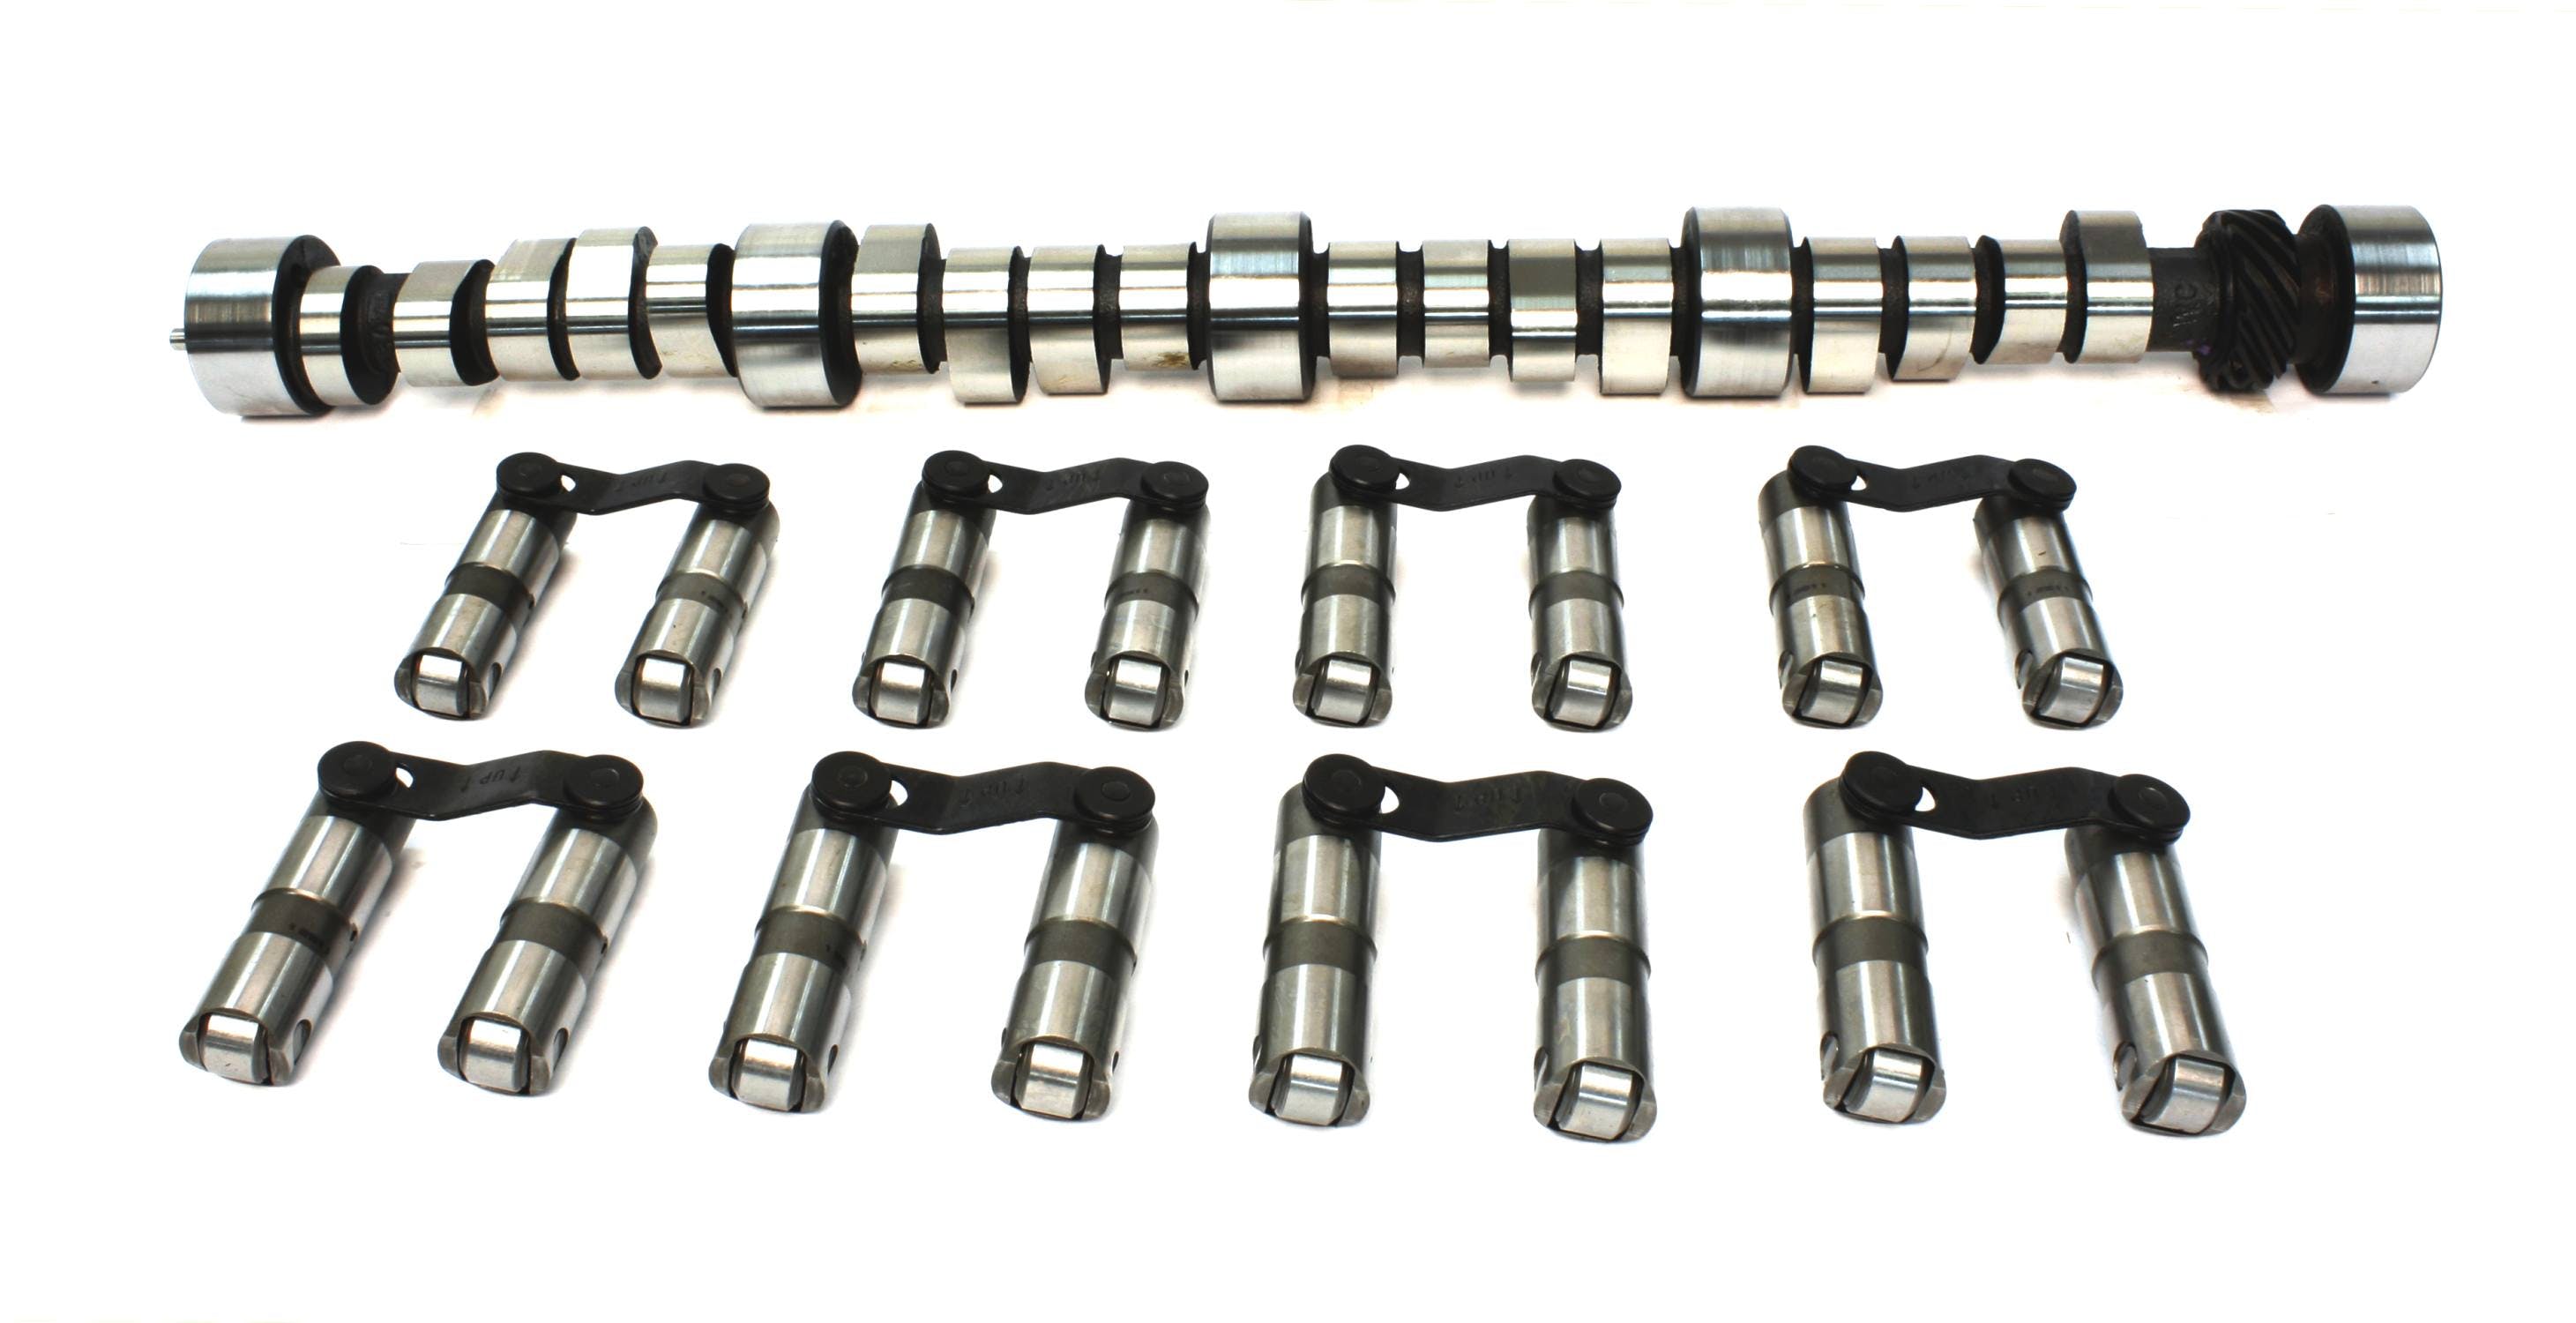 Competition Cams CL11-411-8 NITROUS HP 230/242 HYDRAULIC ROLLER CAM/LIFTER KIT CHEVROLET BIG BLOCK 396-454